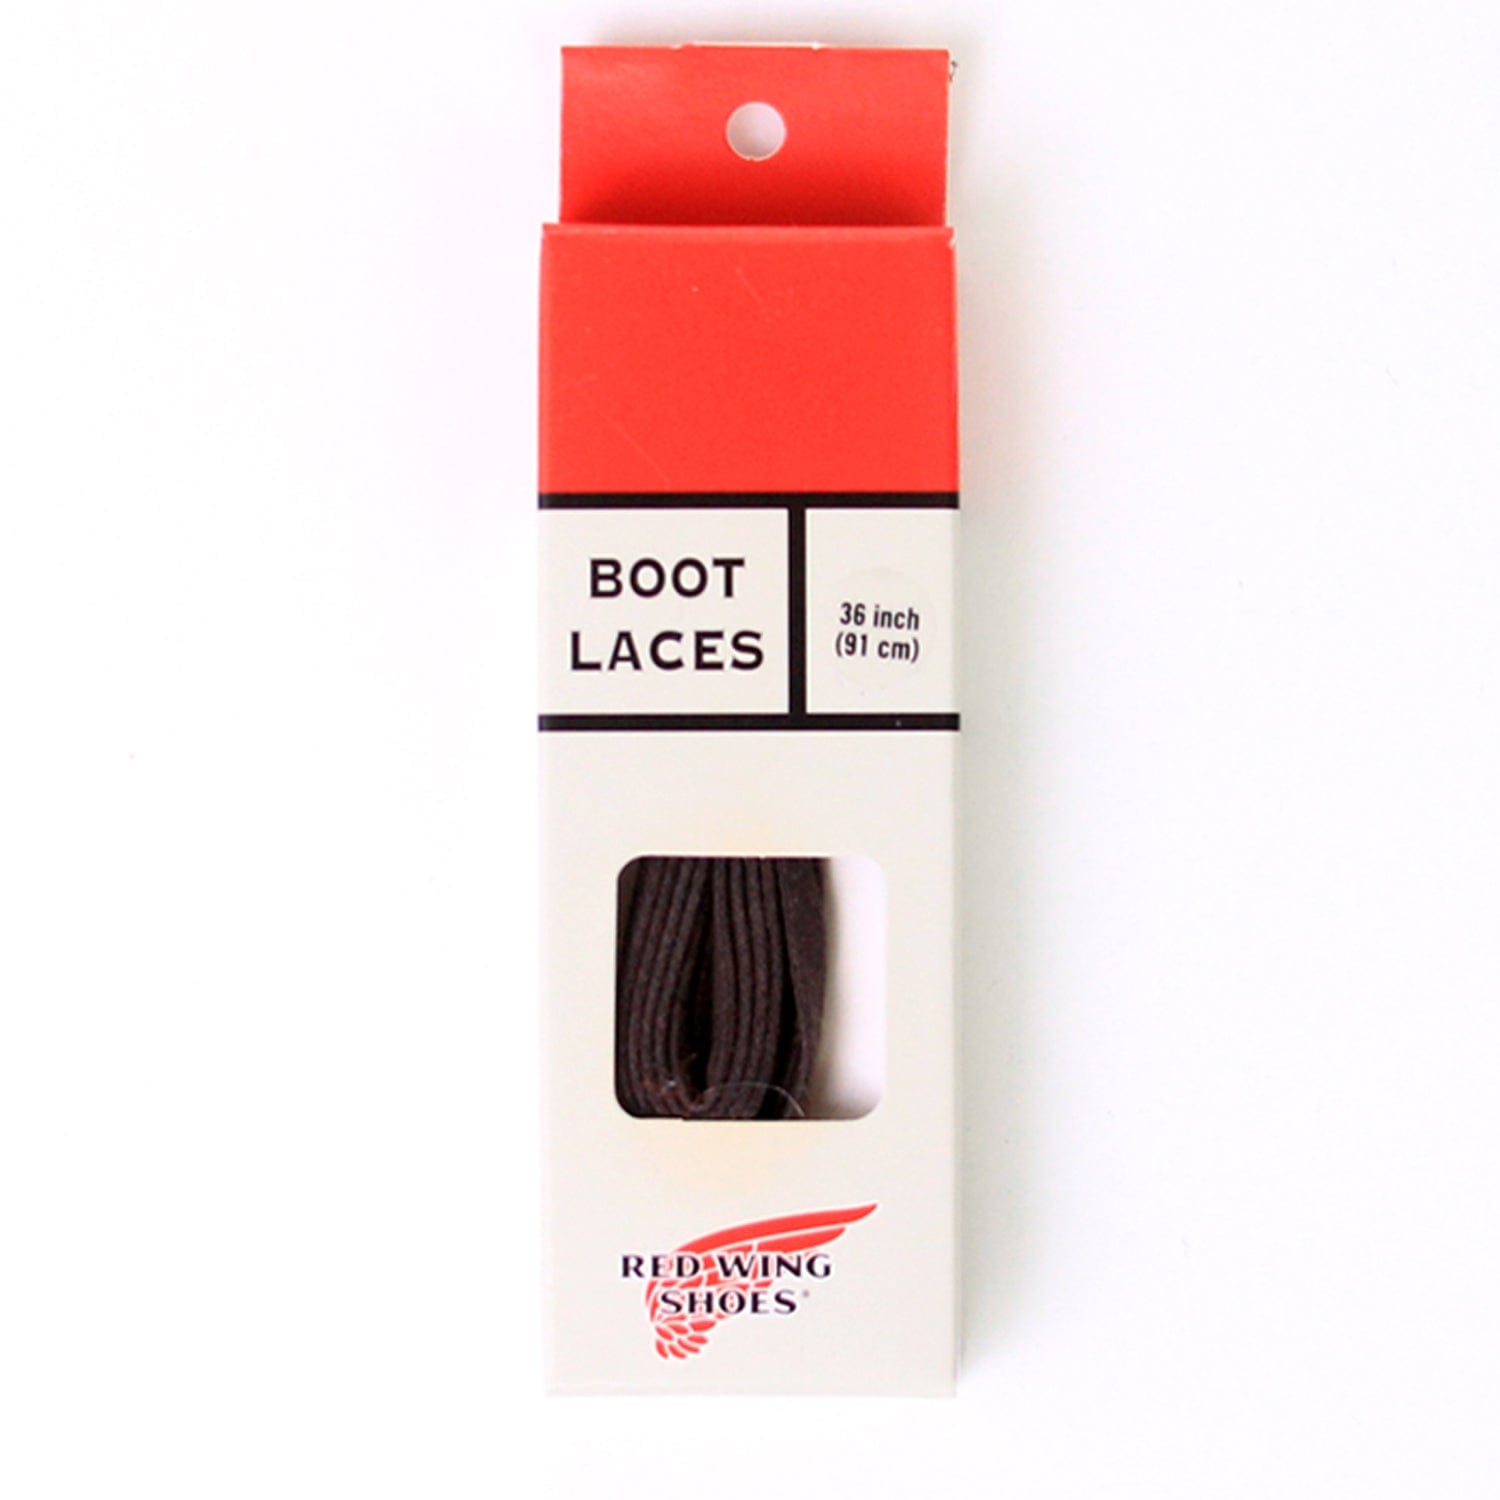 36 inch waxed shoelaces